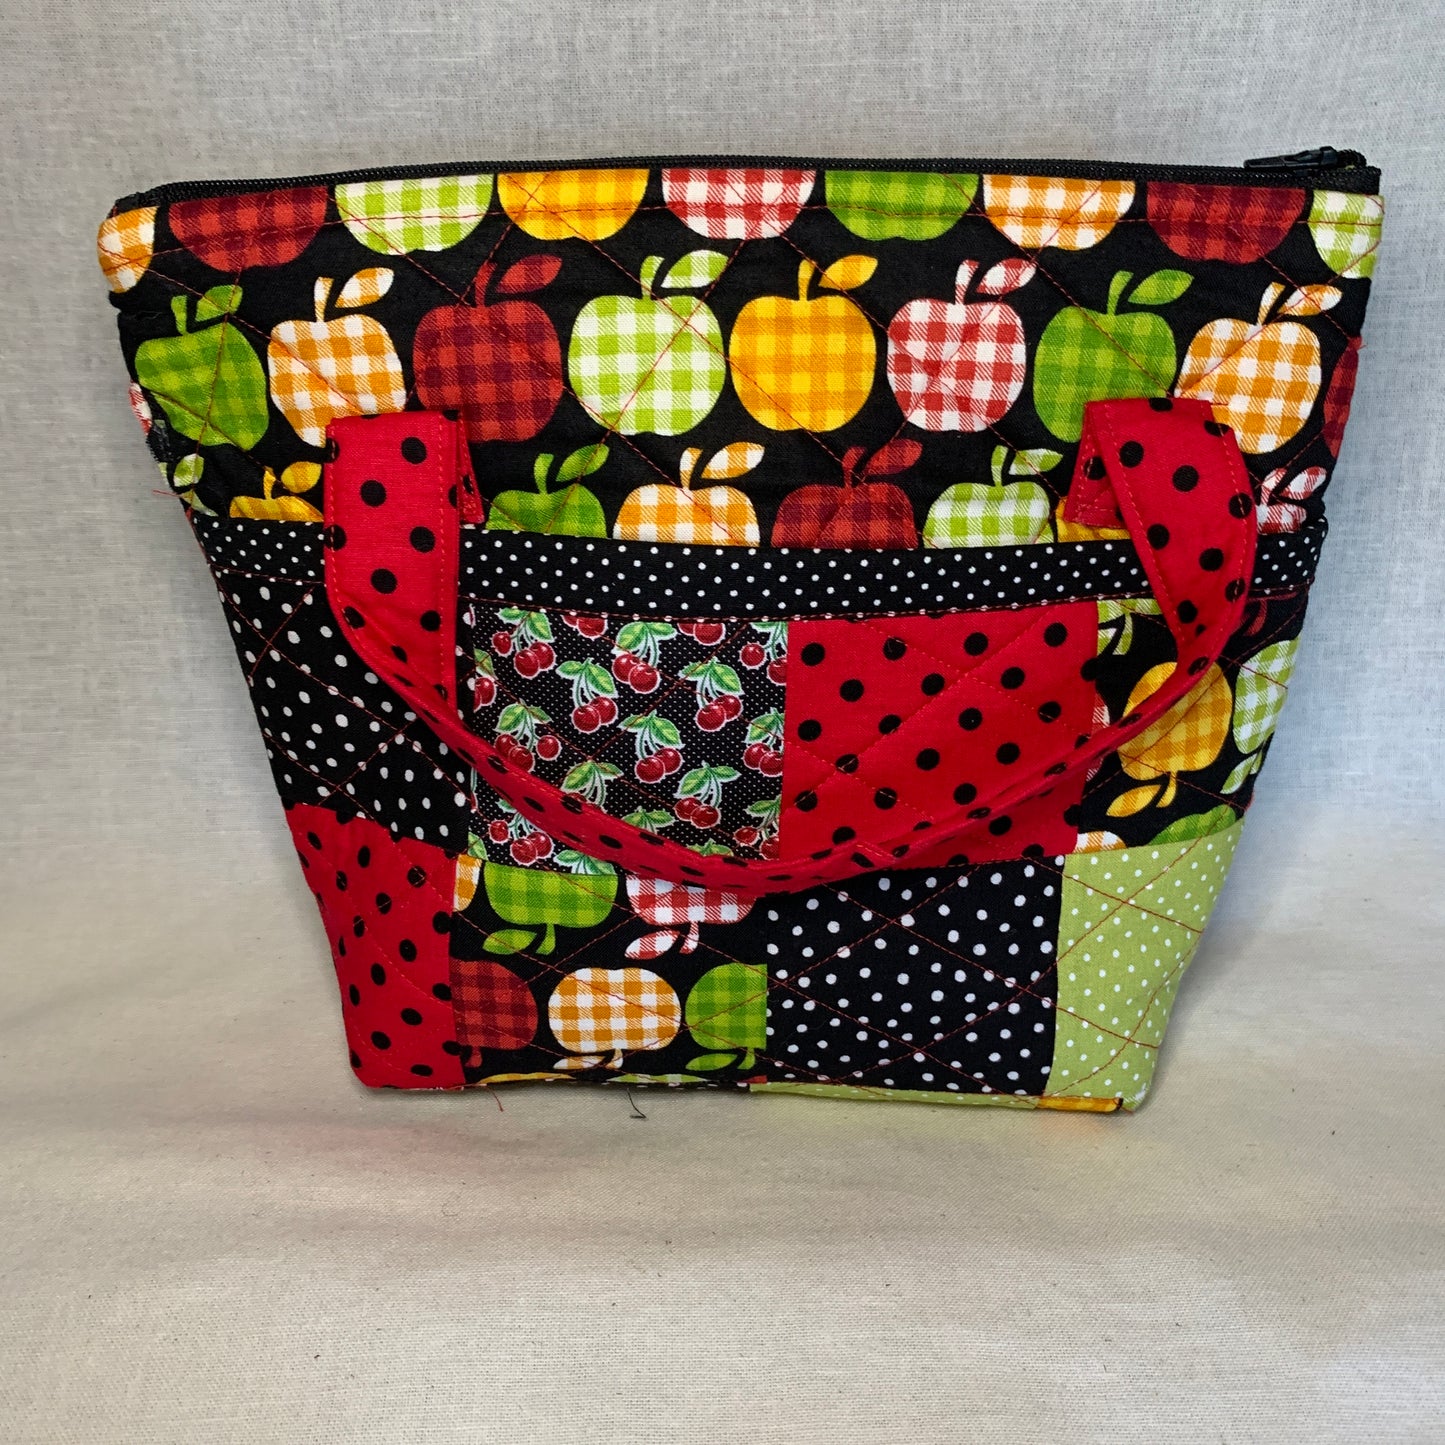 Adorable and whimsical hand-quilted patchwork tote for girls, updated.